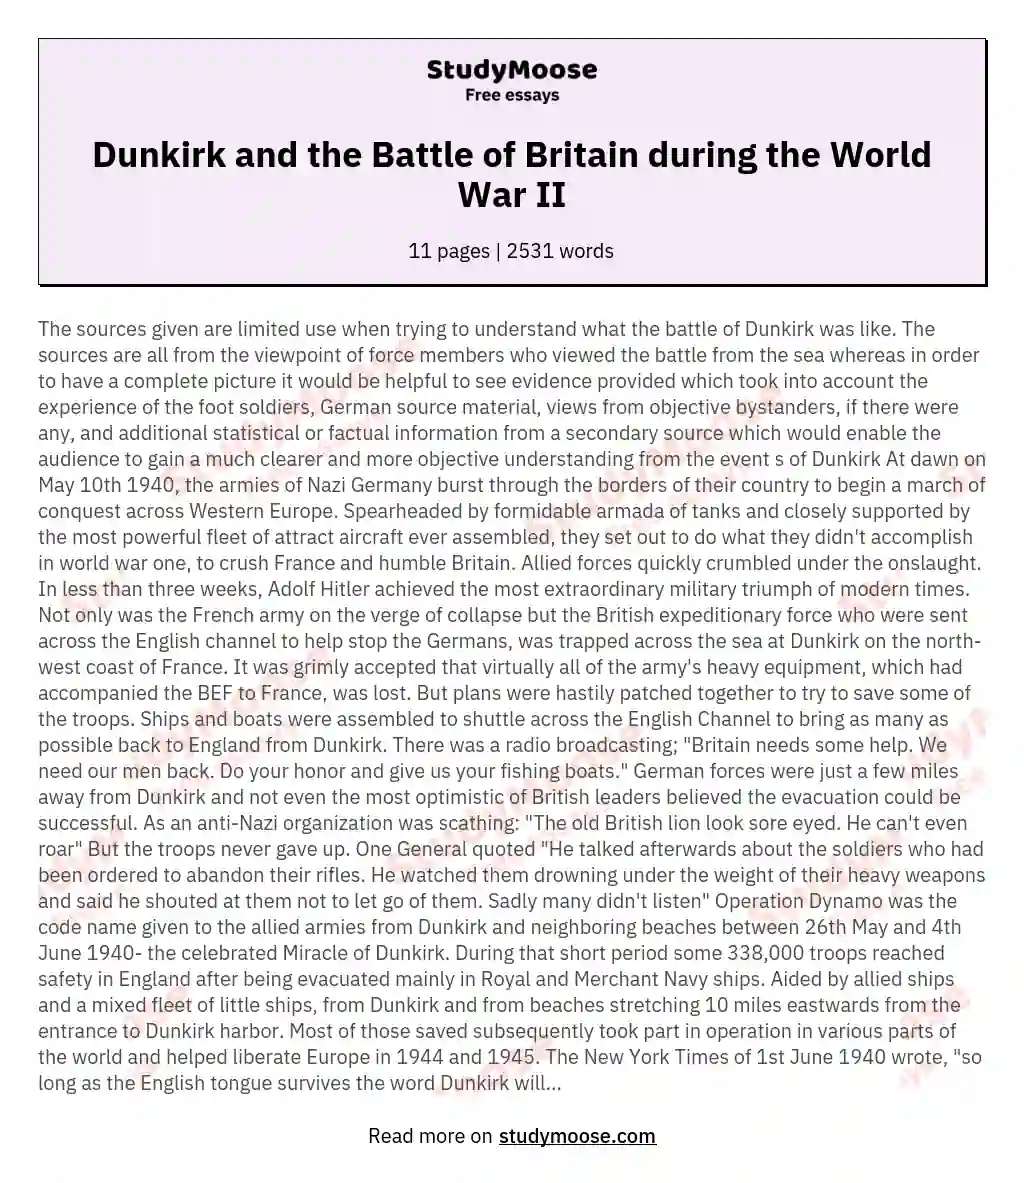 Dunkirk and the Battle of Britain during the World War II essay